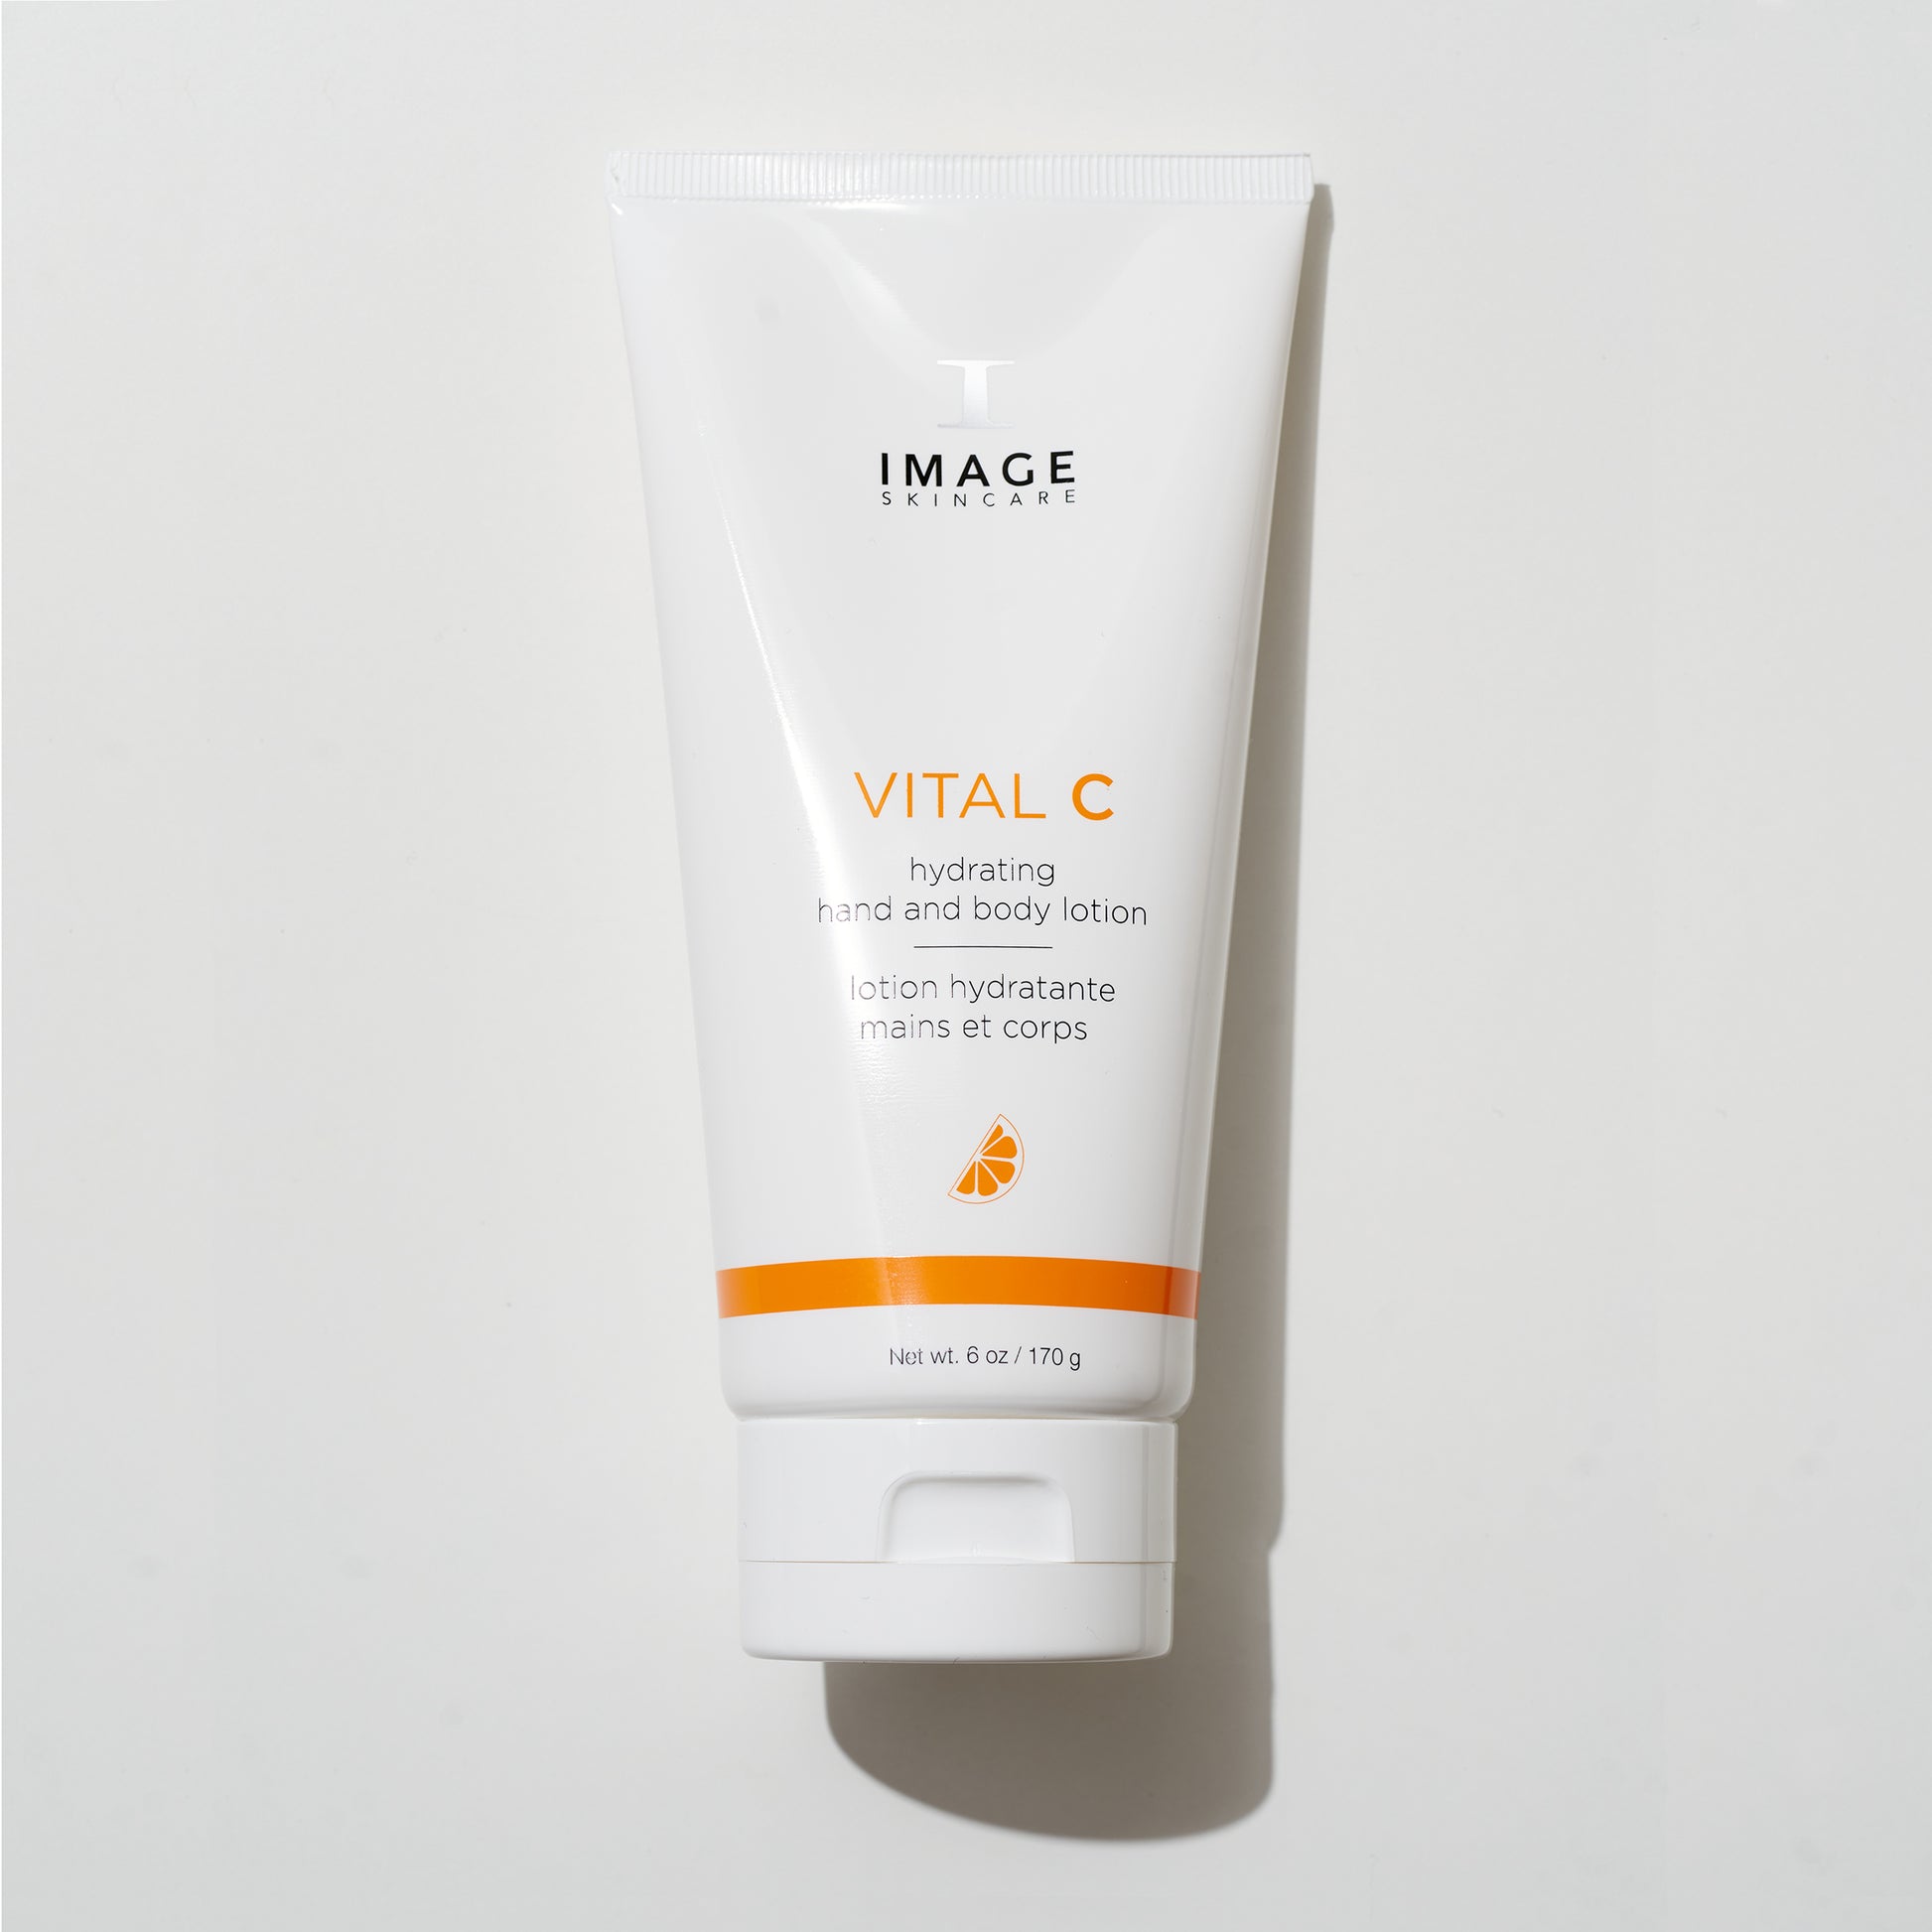 VITAL C Hydrating Hand and Body Lotion, Image Skincare